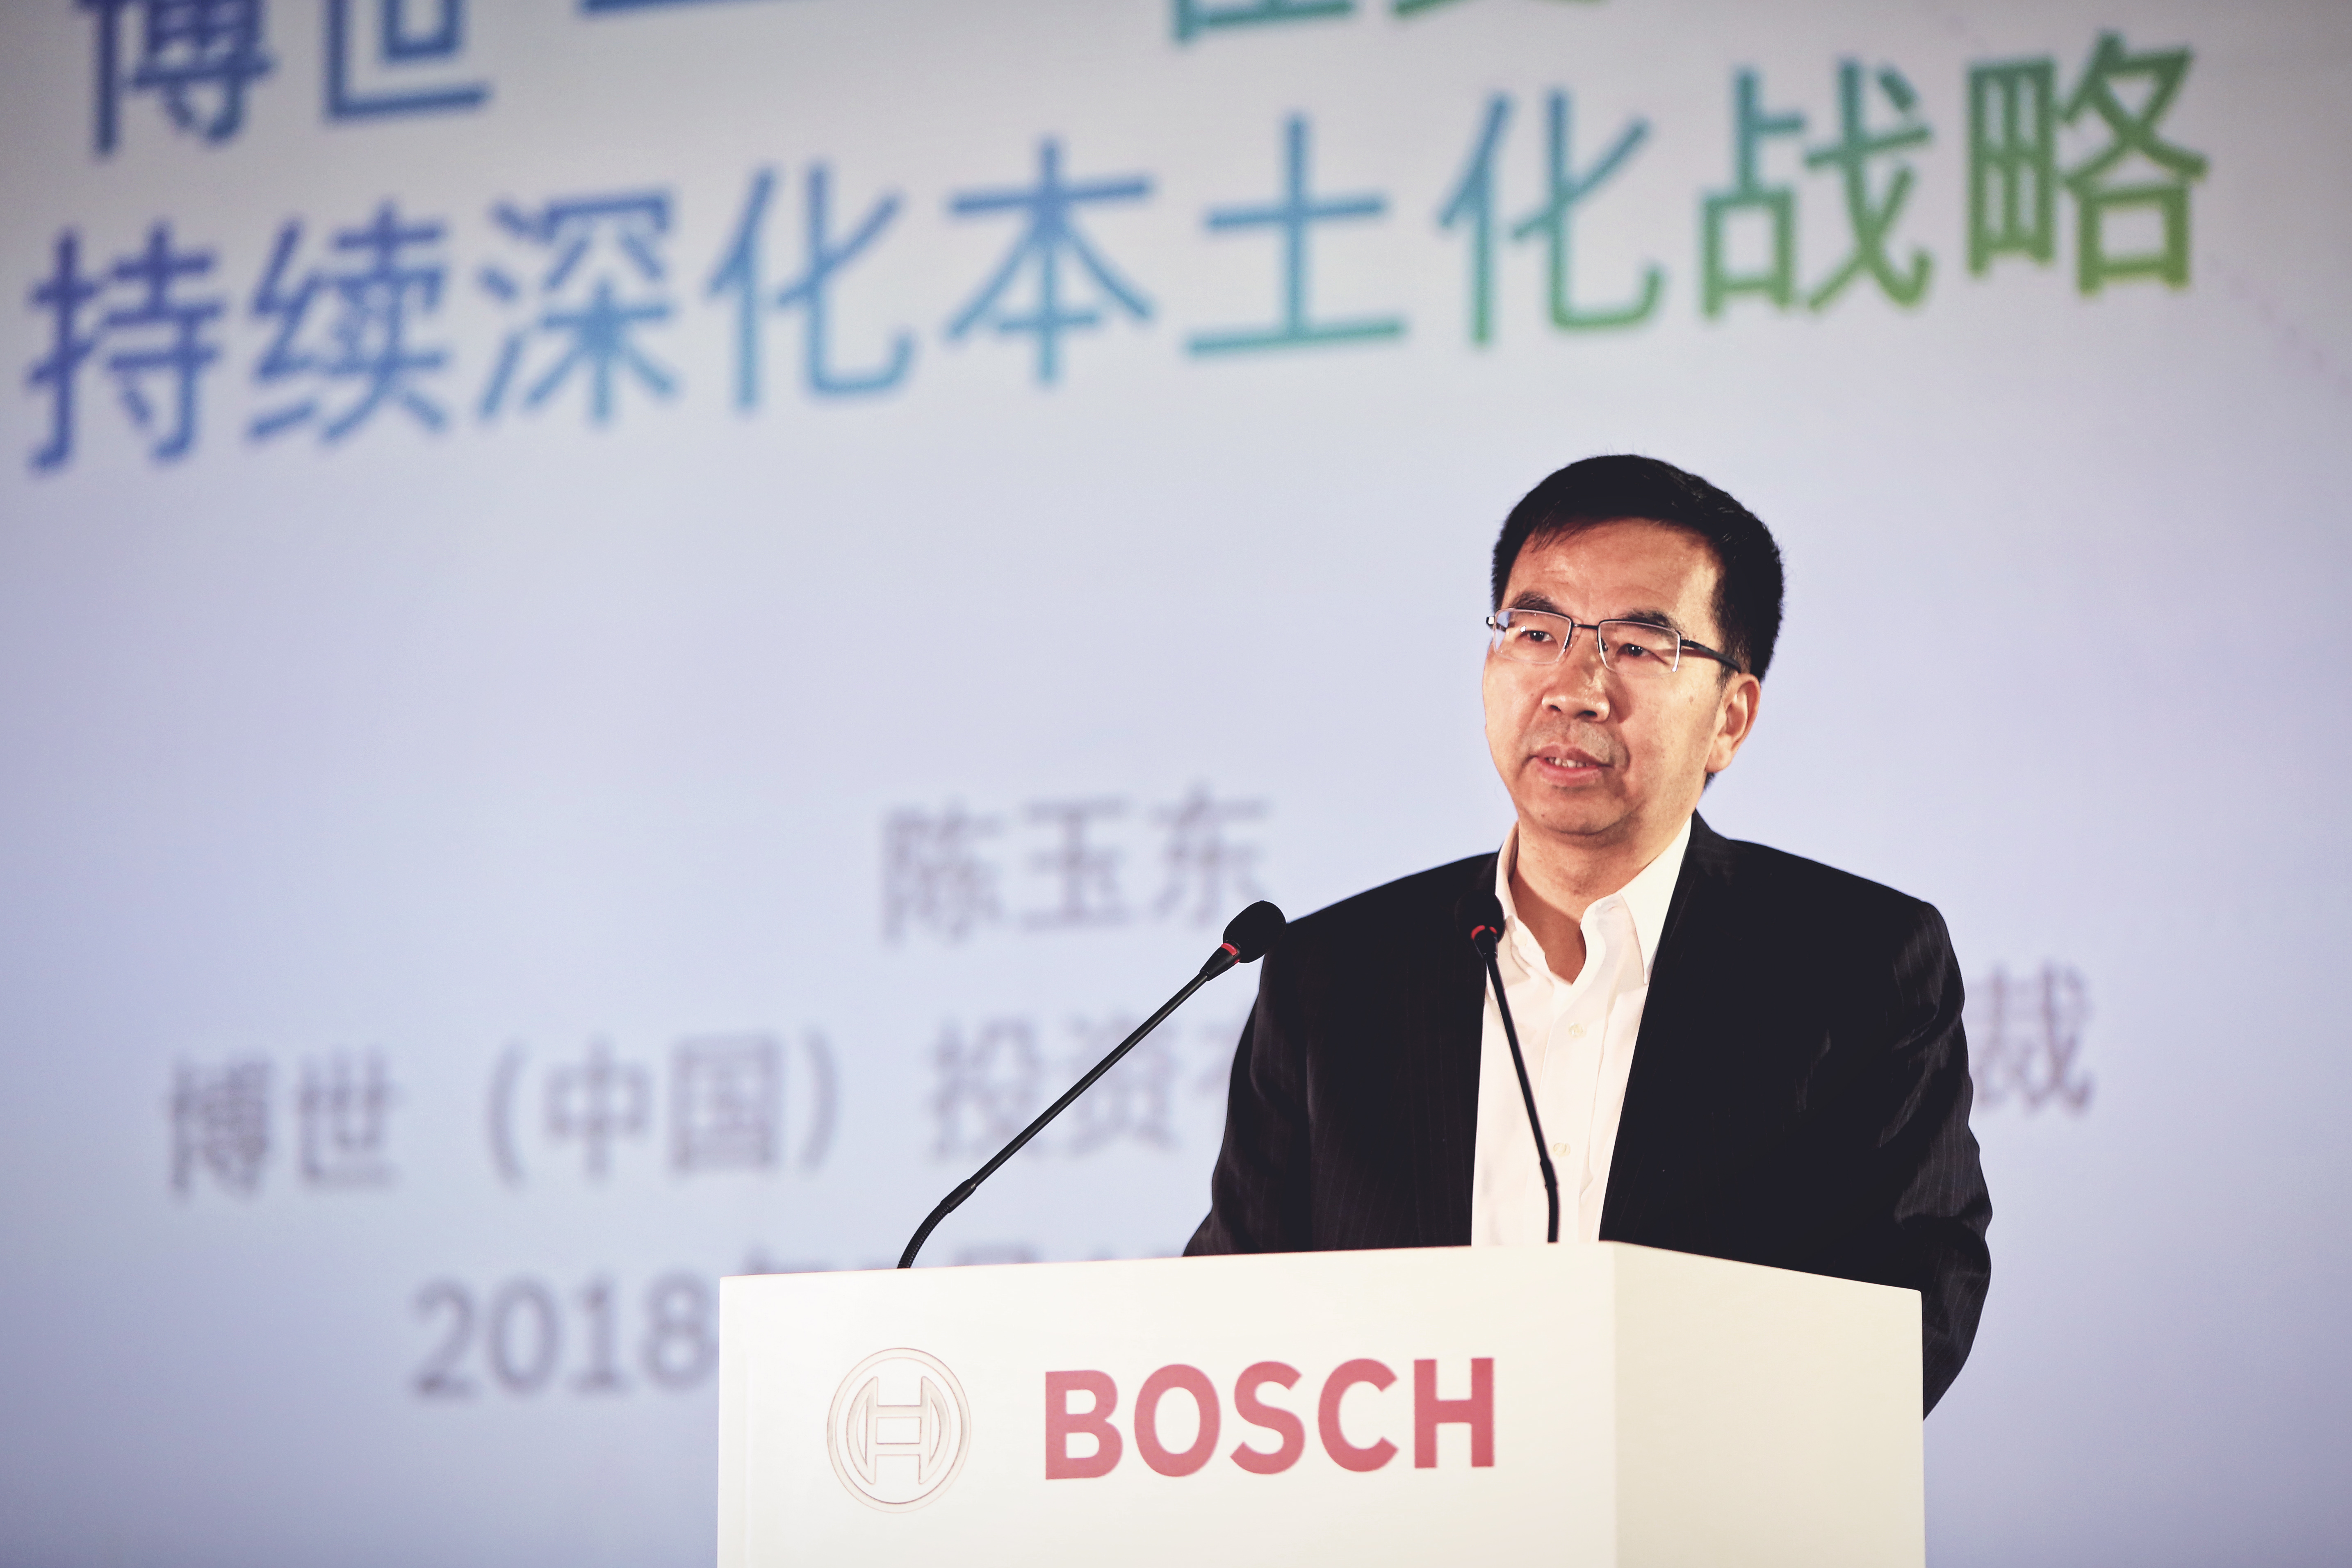 Bosch employs more than 60,000 associates in China, which is its largest market outside Germany